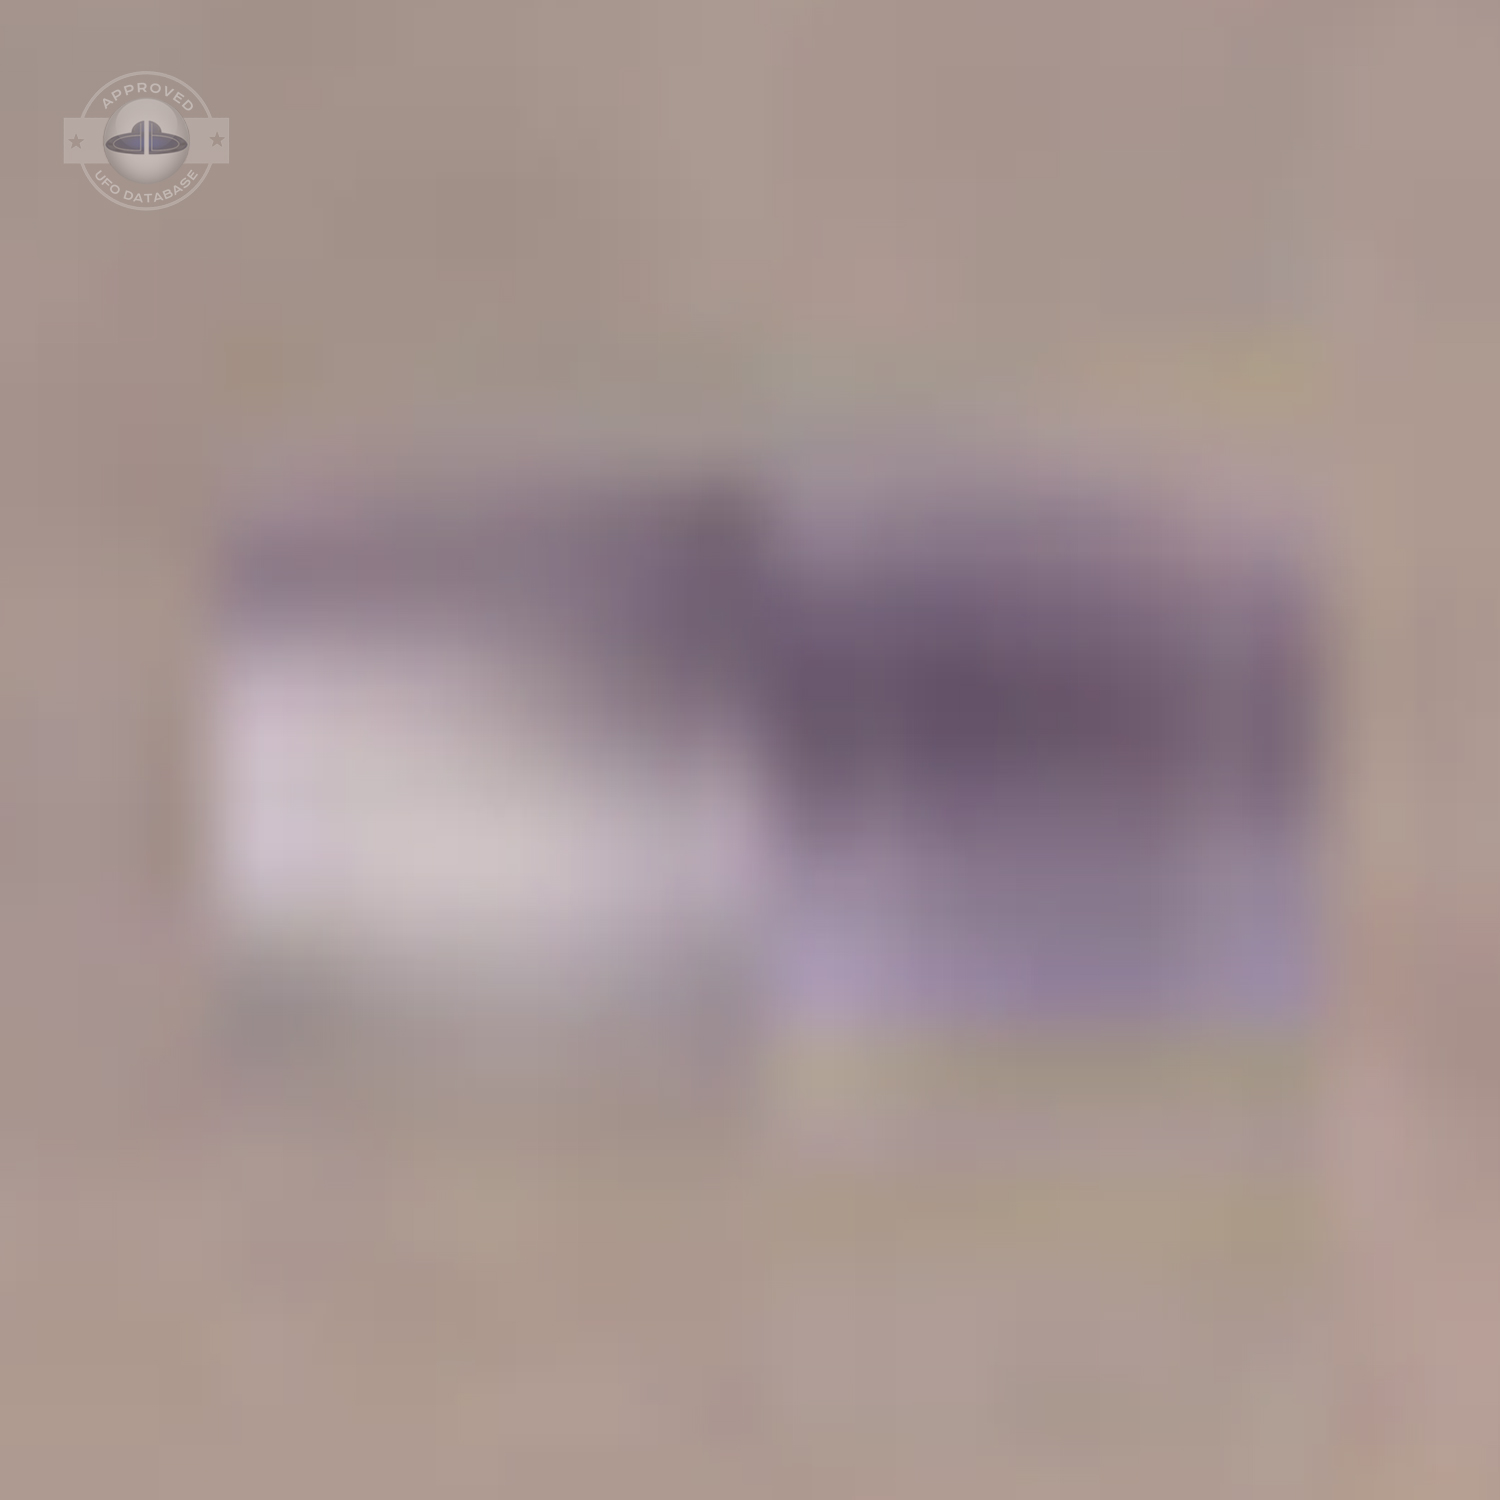 UFO Faster than anything on Earth caught on Video frame | Germany 2011 UFO Picture #213-7